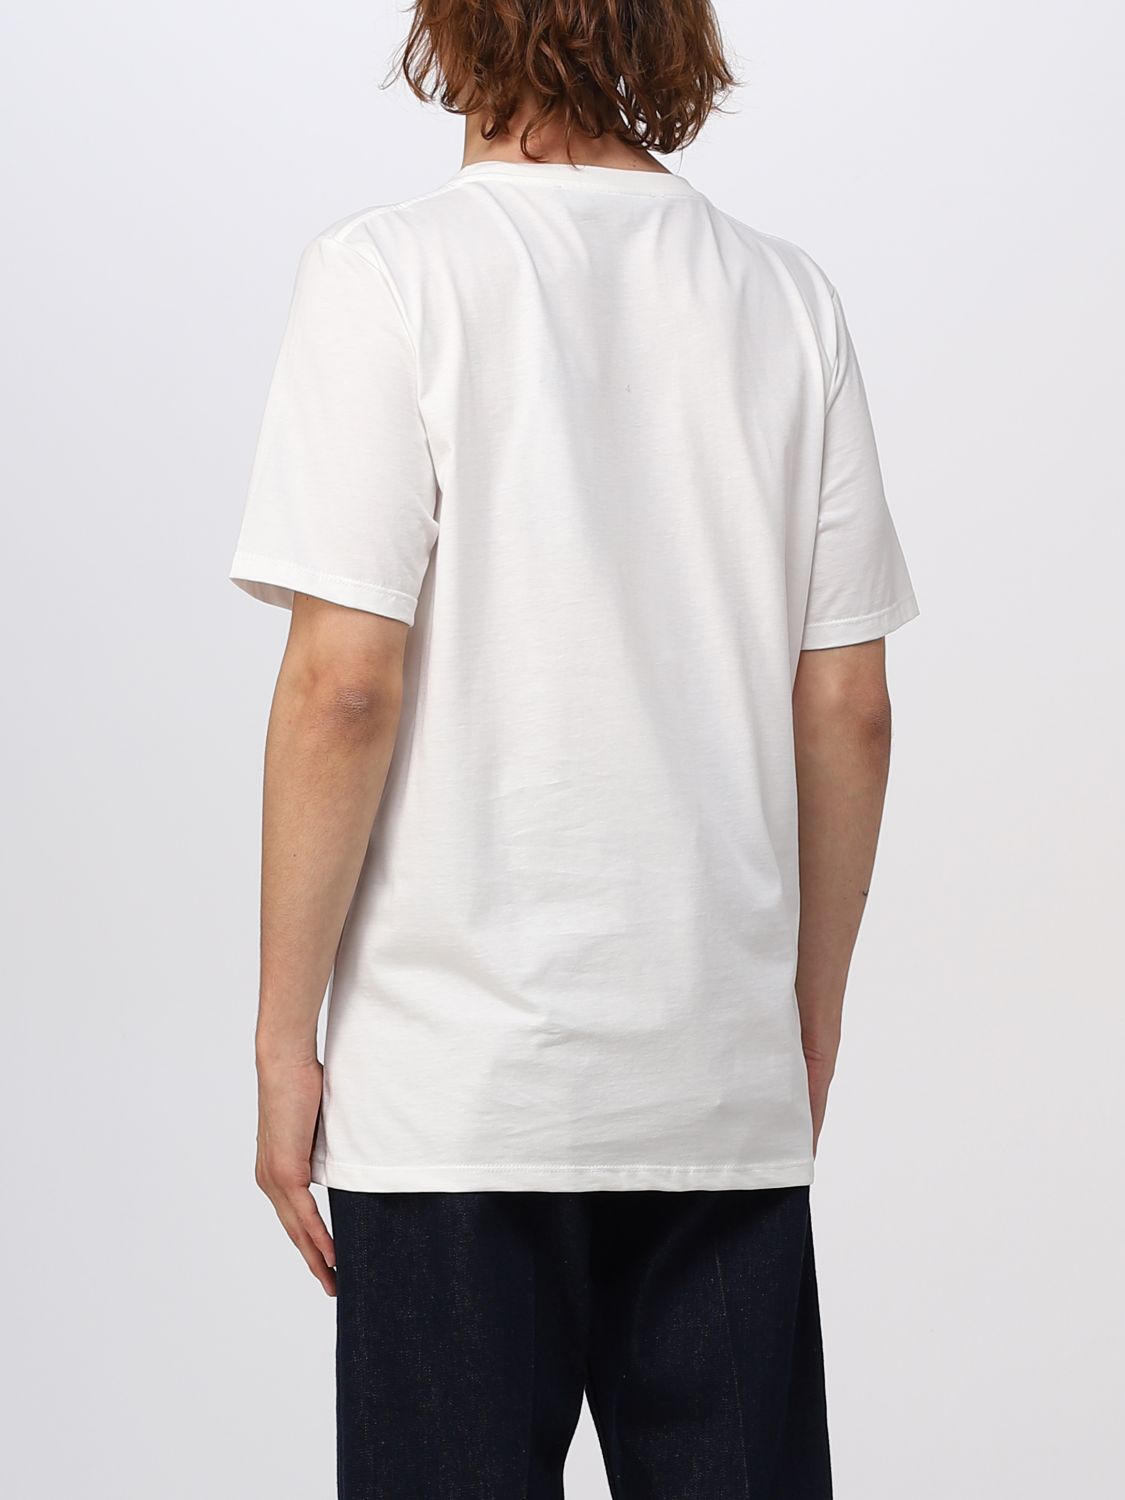 WIPEOUT: t-shirt for man - White | Wipeout t-shirt STRUPPEN #05 online ...